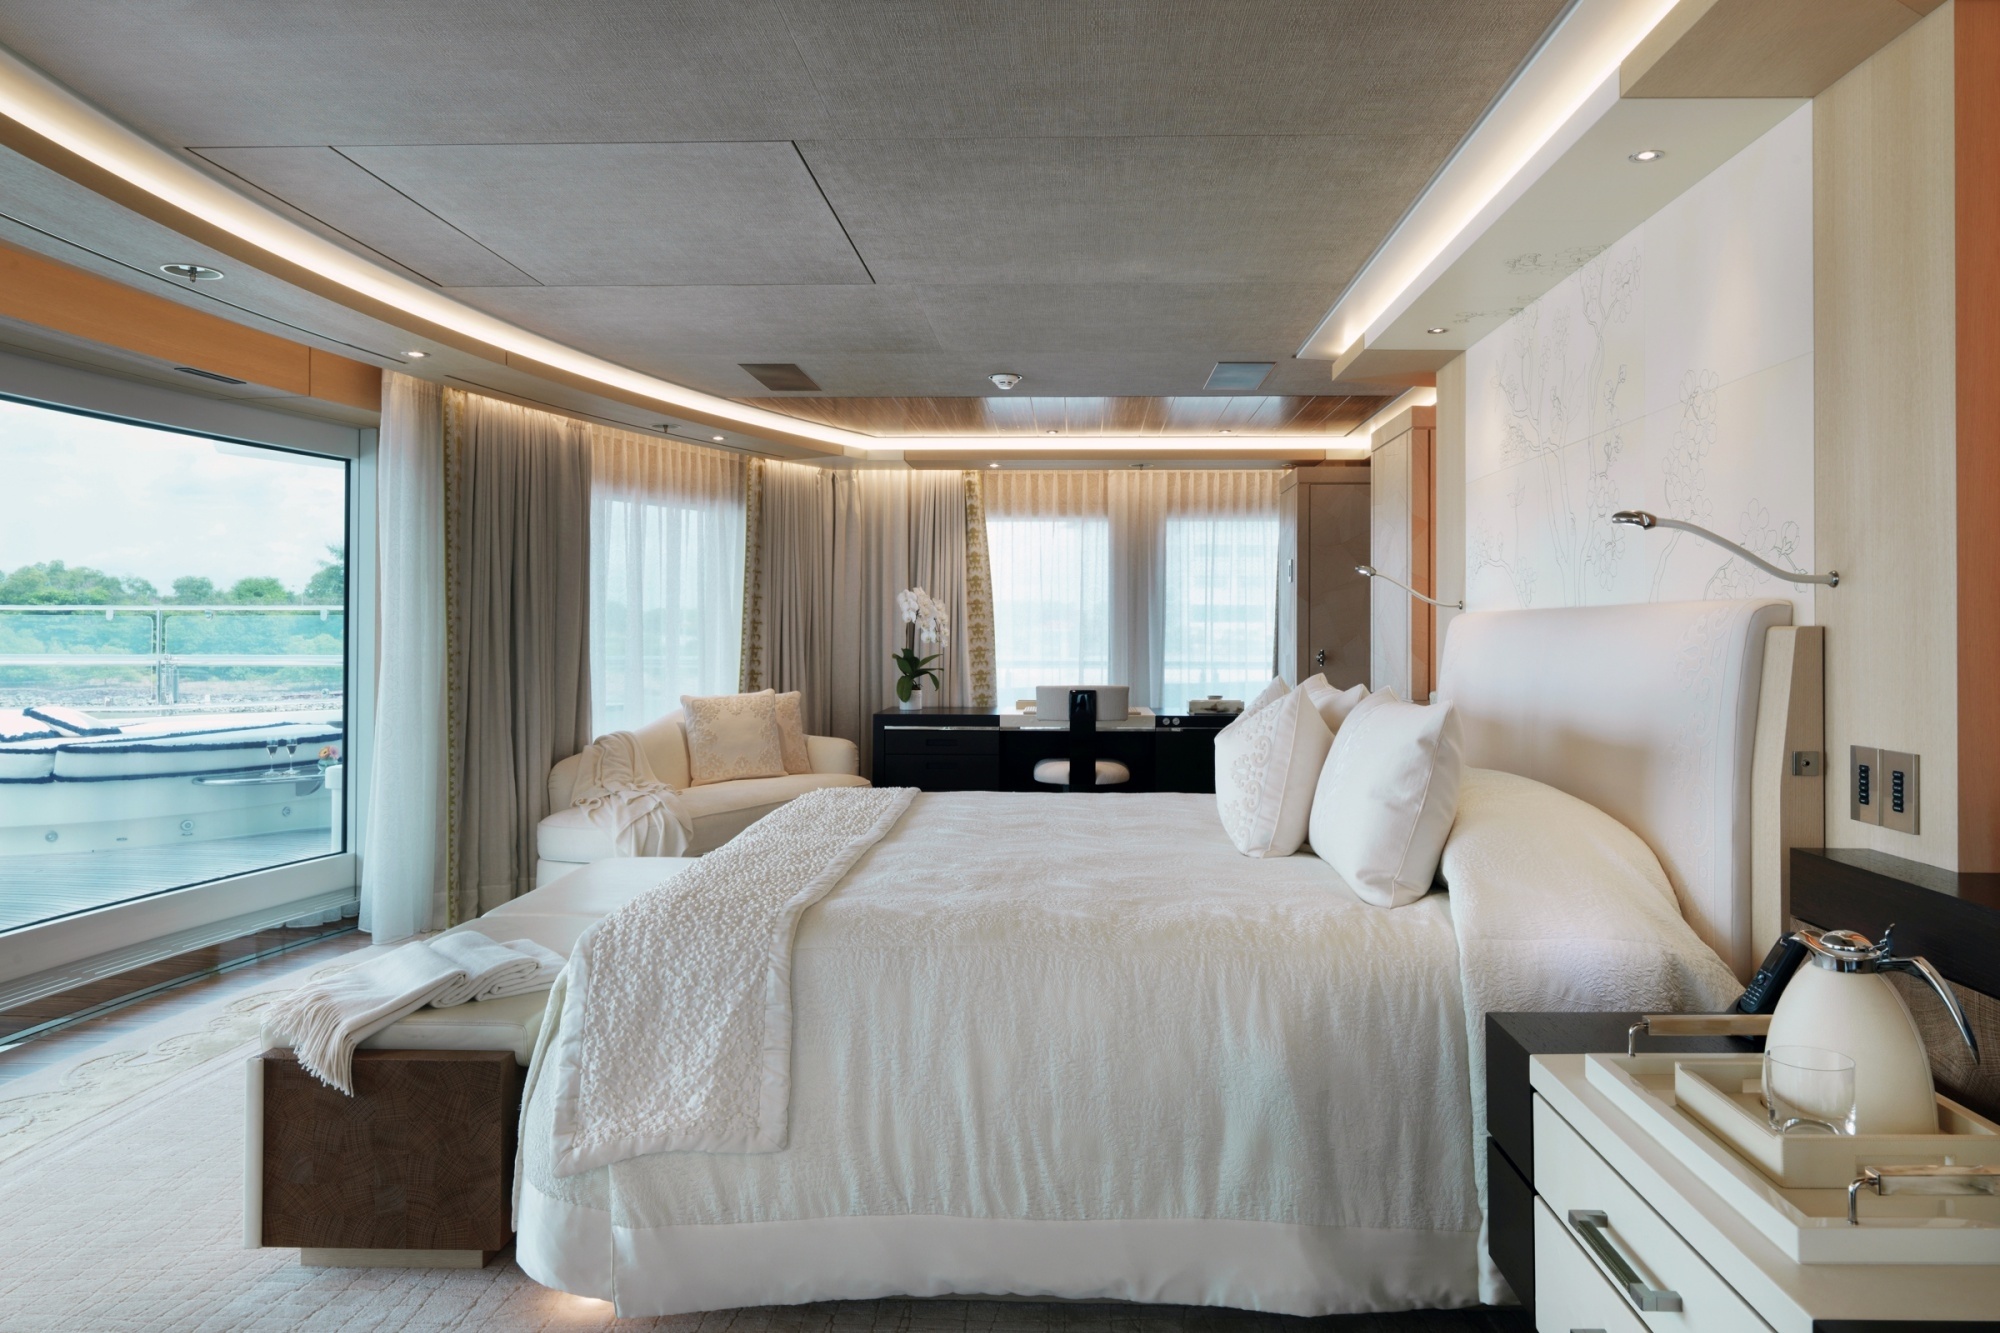 For the most important guests the layout provides VIP apartments with panoramic 180-degree sea view. The only drawback is that such beauty sleep will be immediately removed!